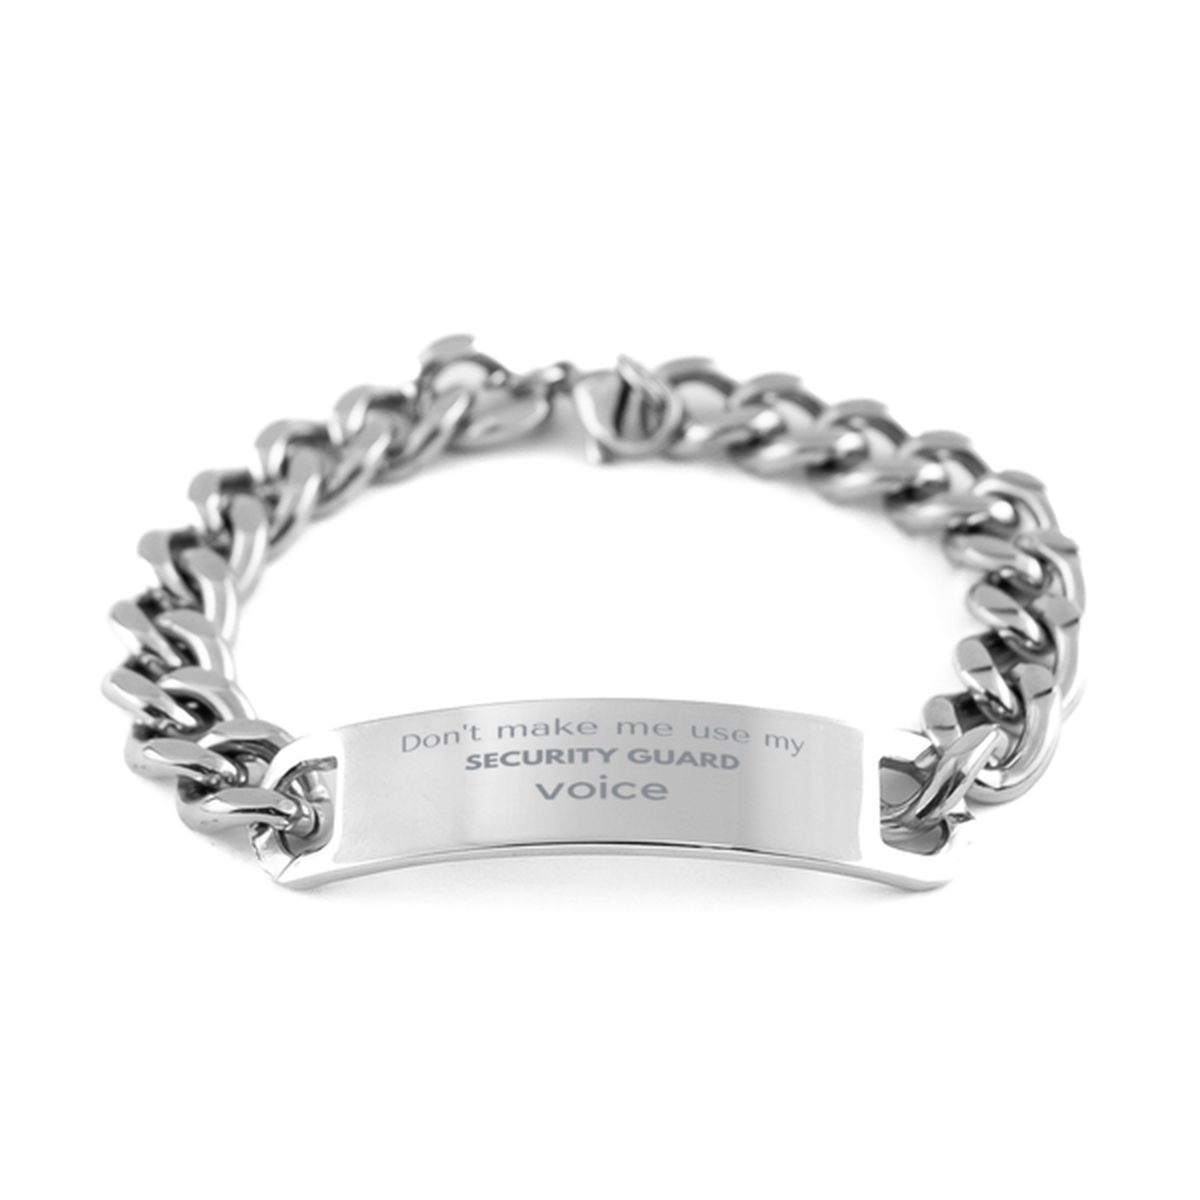 Don't make me use my Security Guard voice, Sarcasm Security Guard Gifts, Christmas Security Guard Cuban Chain Stainless Steel Bracelet Birthday Unique Gifts For Security Guard Coworkers, Men, Women, Colleague, Friends